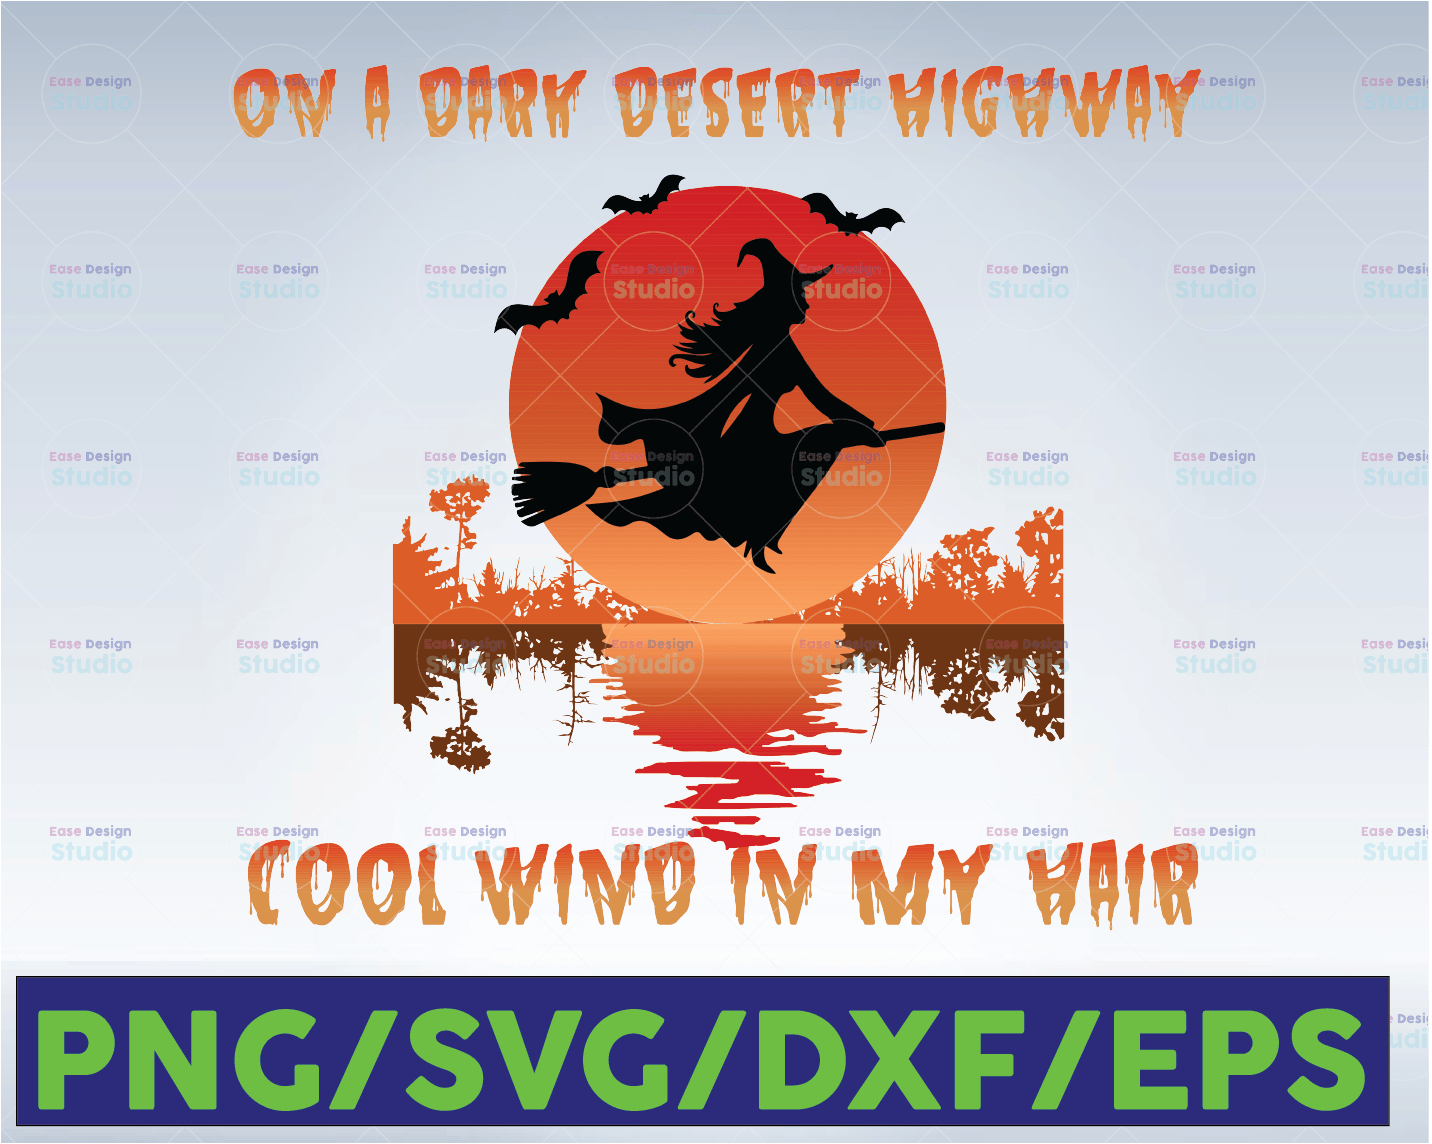 Cat PNG PNG File Cats Lover Funny Png On A Dark Desert High Way Cool Wind In My Hair Instant Download Digital File Png For Shirts